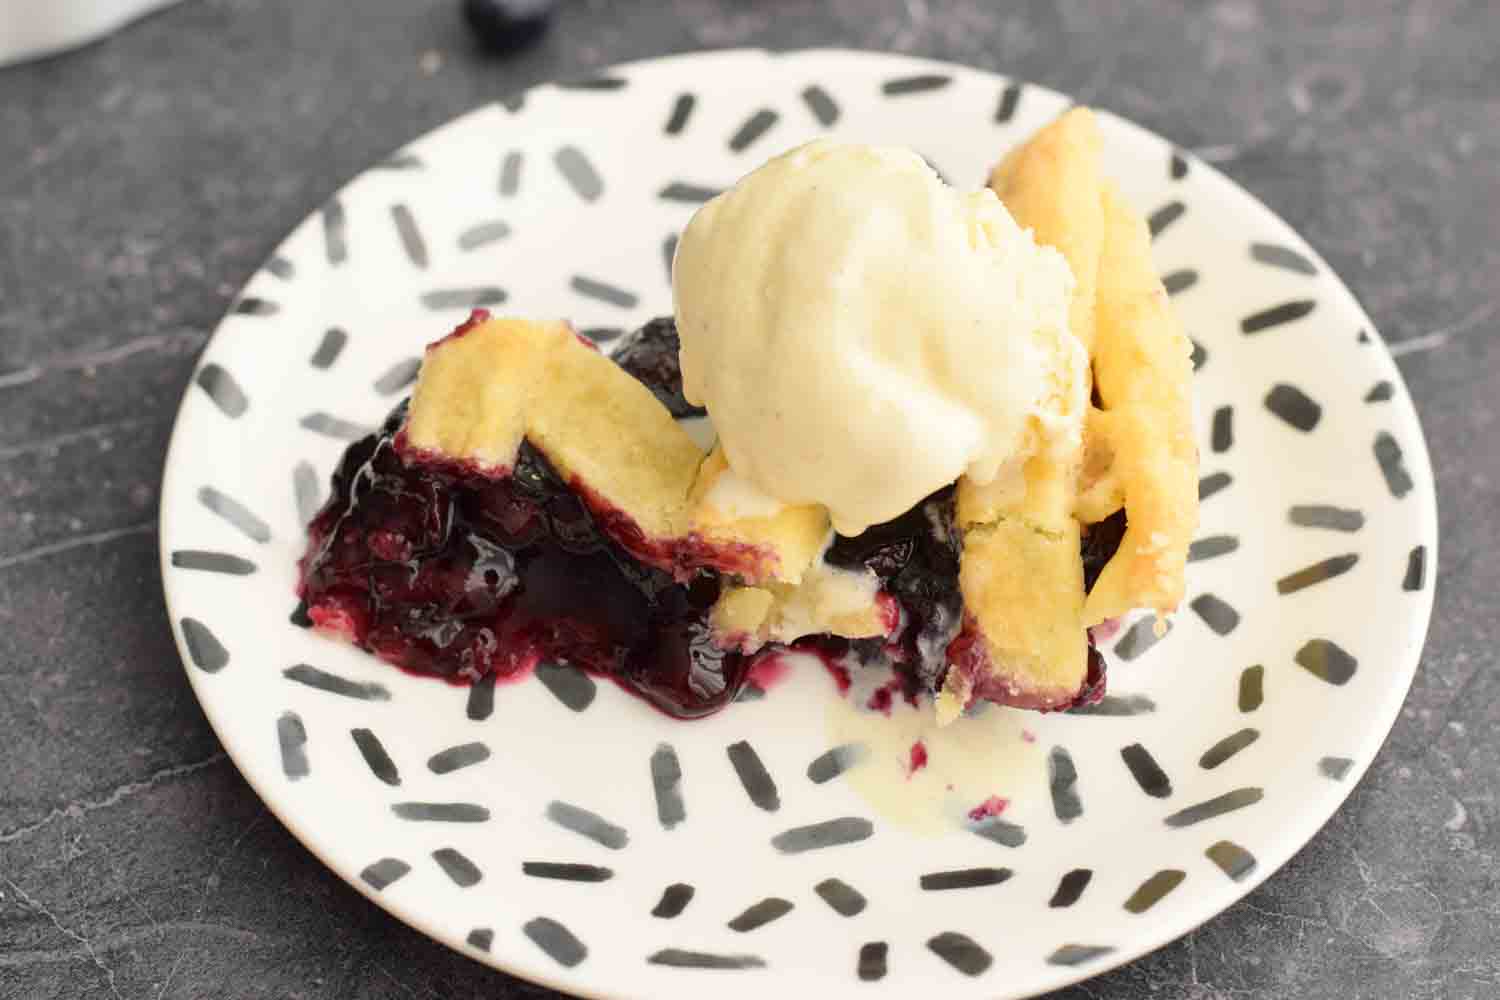 A piece of blueberry pie with ice cream on top